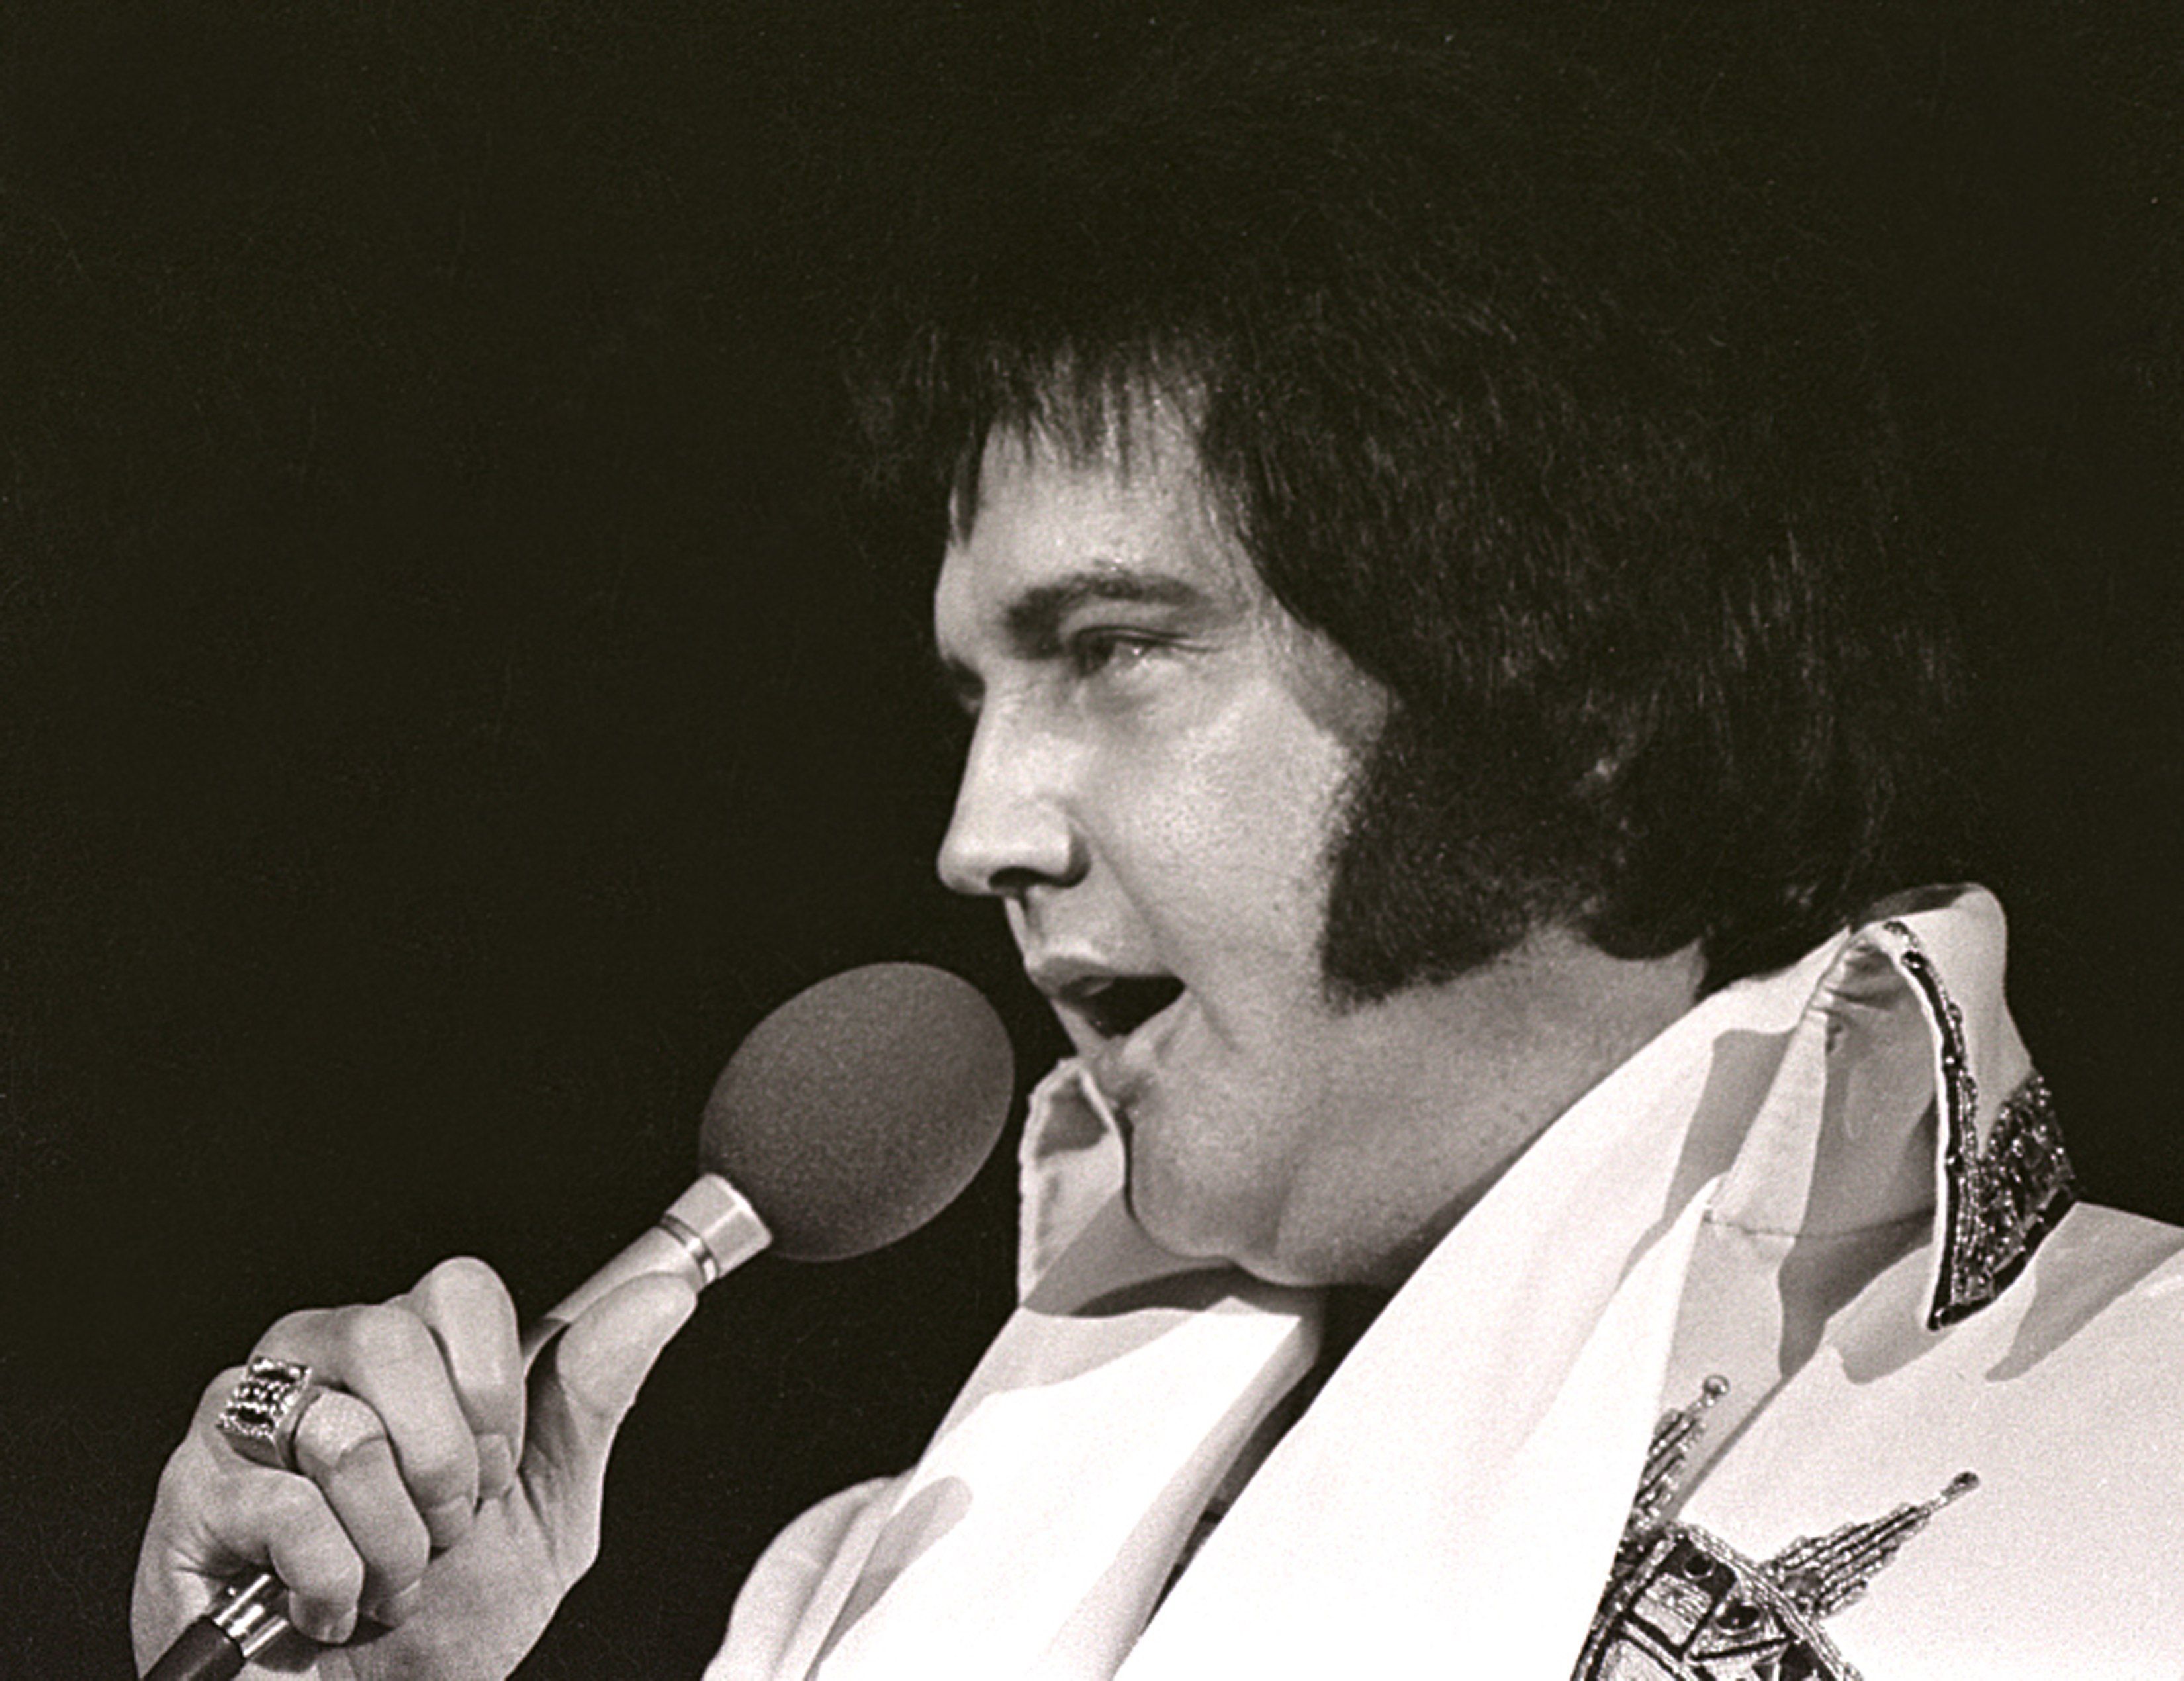 Elvis Presley performs in a concert in Milwaukee, Wisconsin in 1977 | Source: Getty Images